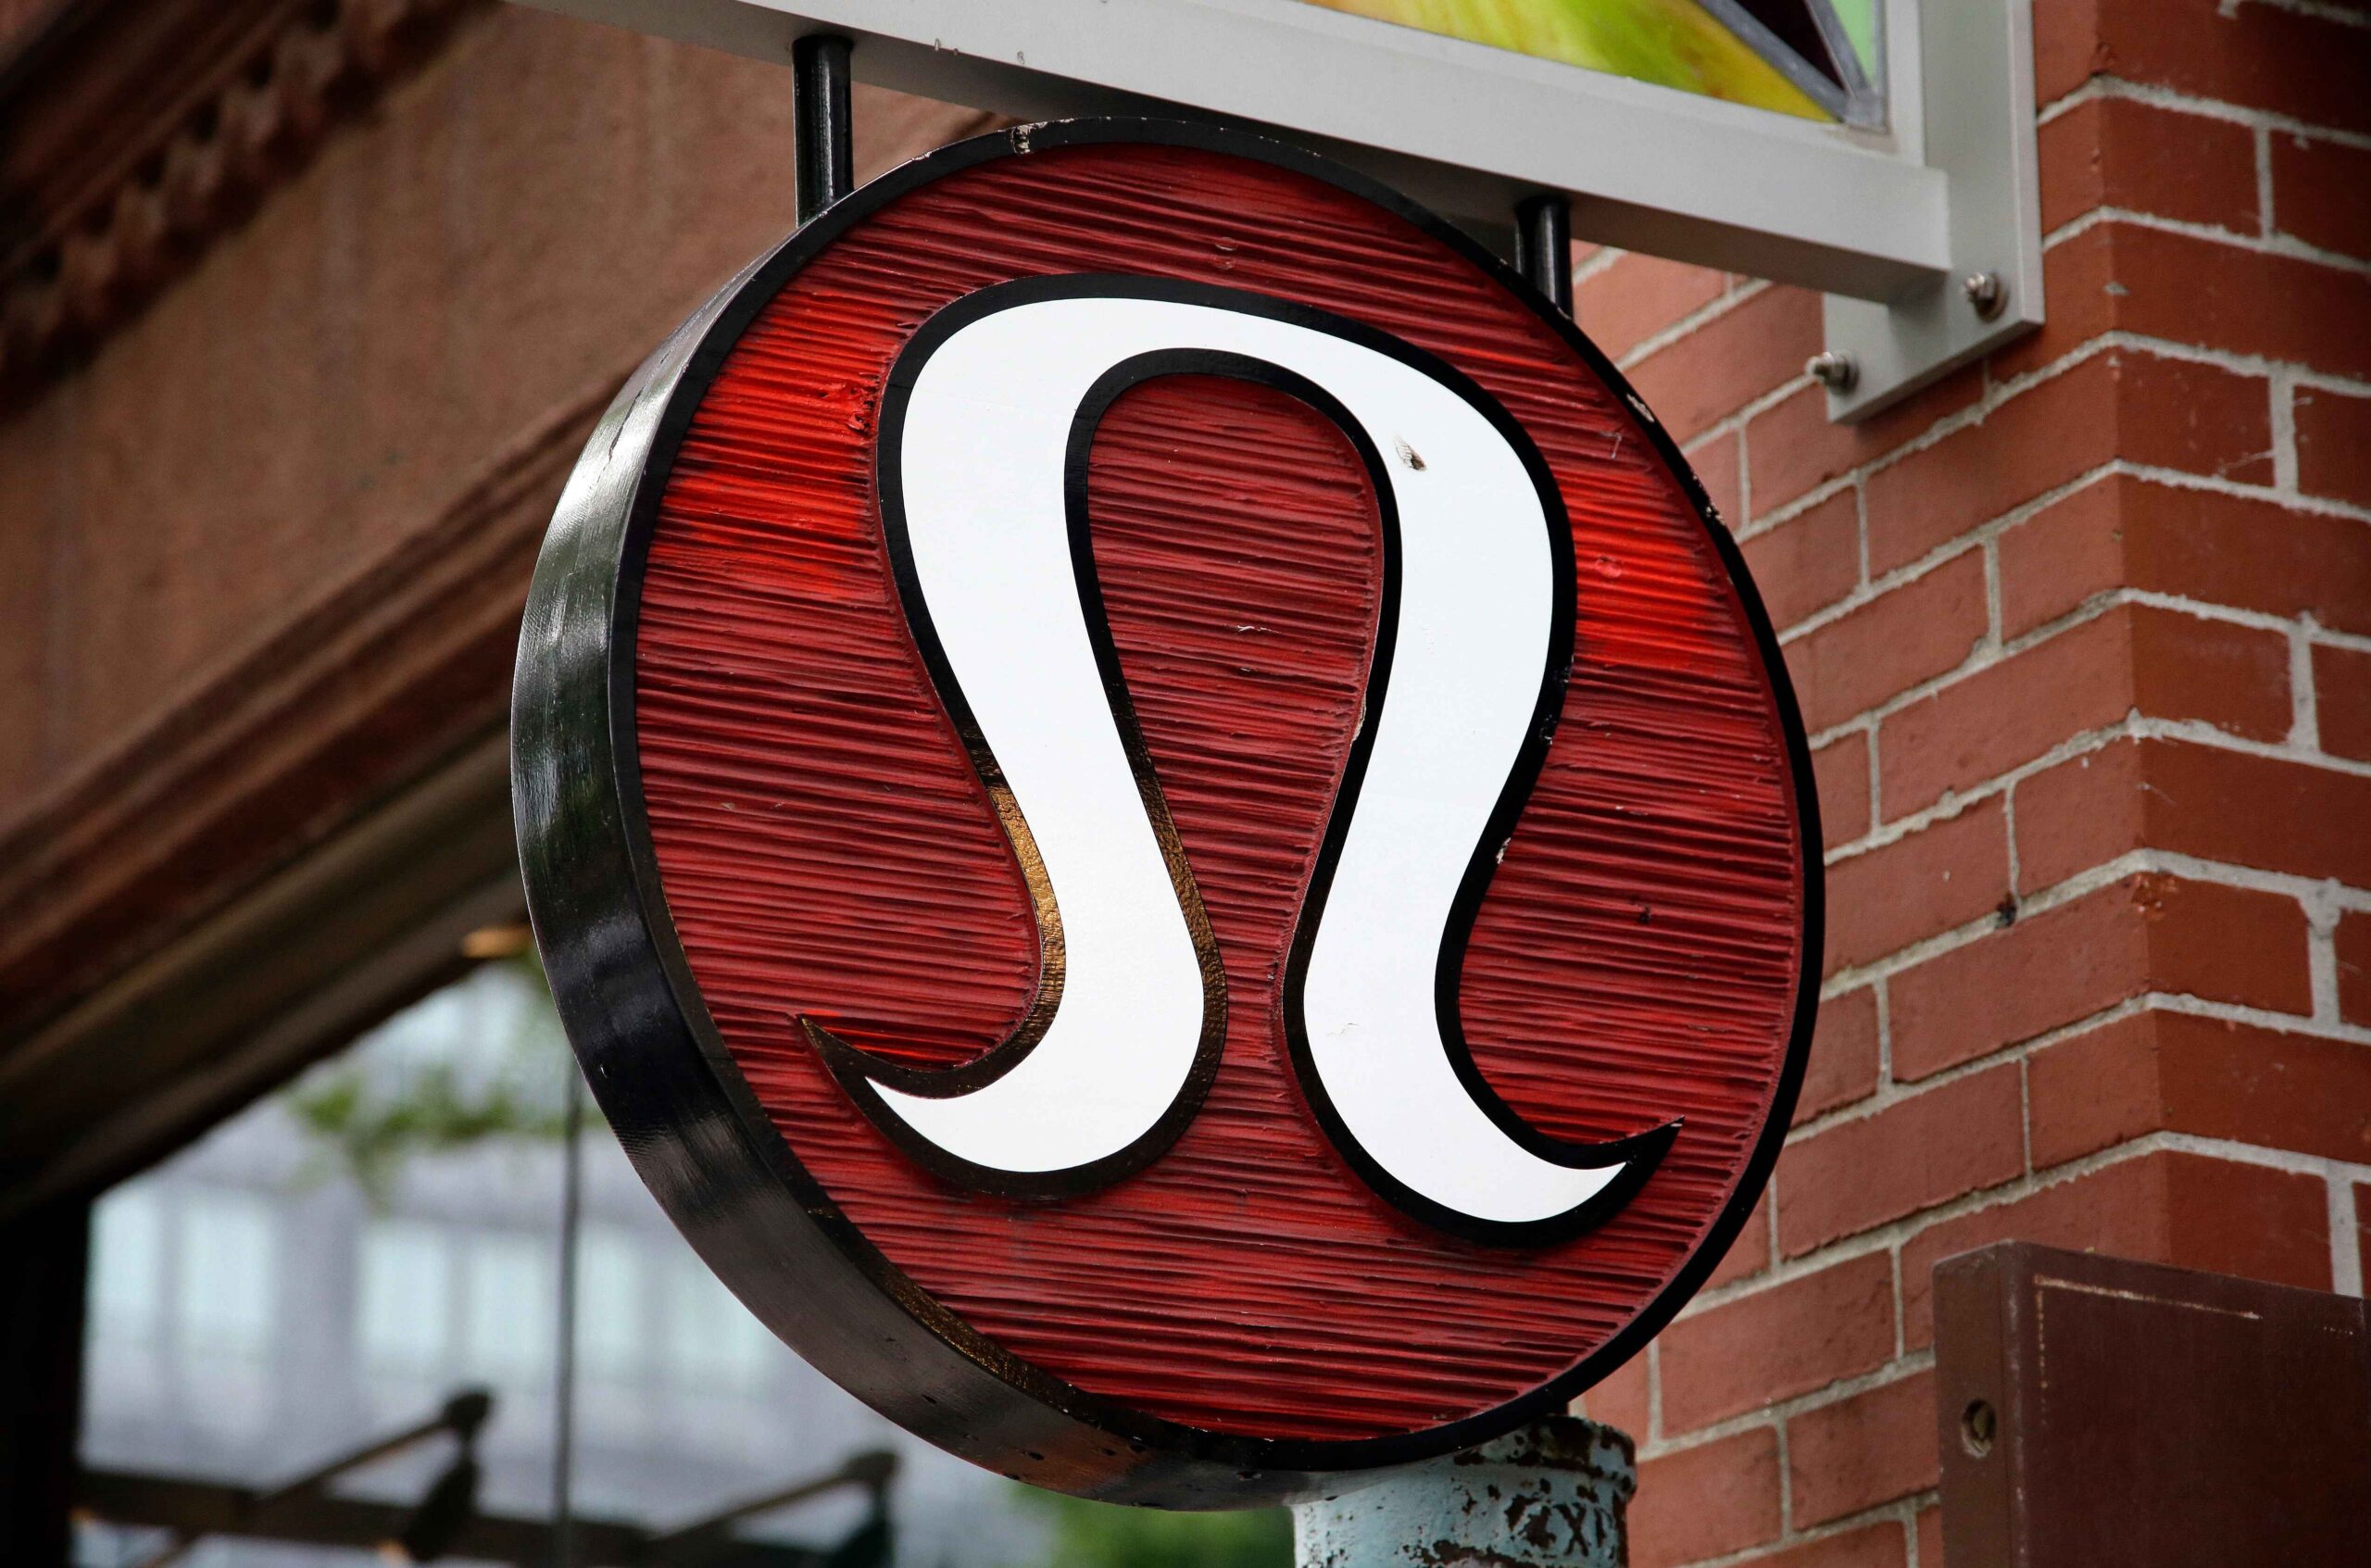 Lululemon founder Chip Wilson bashed the company's Diversity, Equity, and Inclusion (DEI) policies and its use of "unhealthy," "not inspirational" models. (AP Photo/Steven Senne, File)